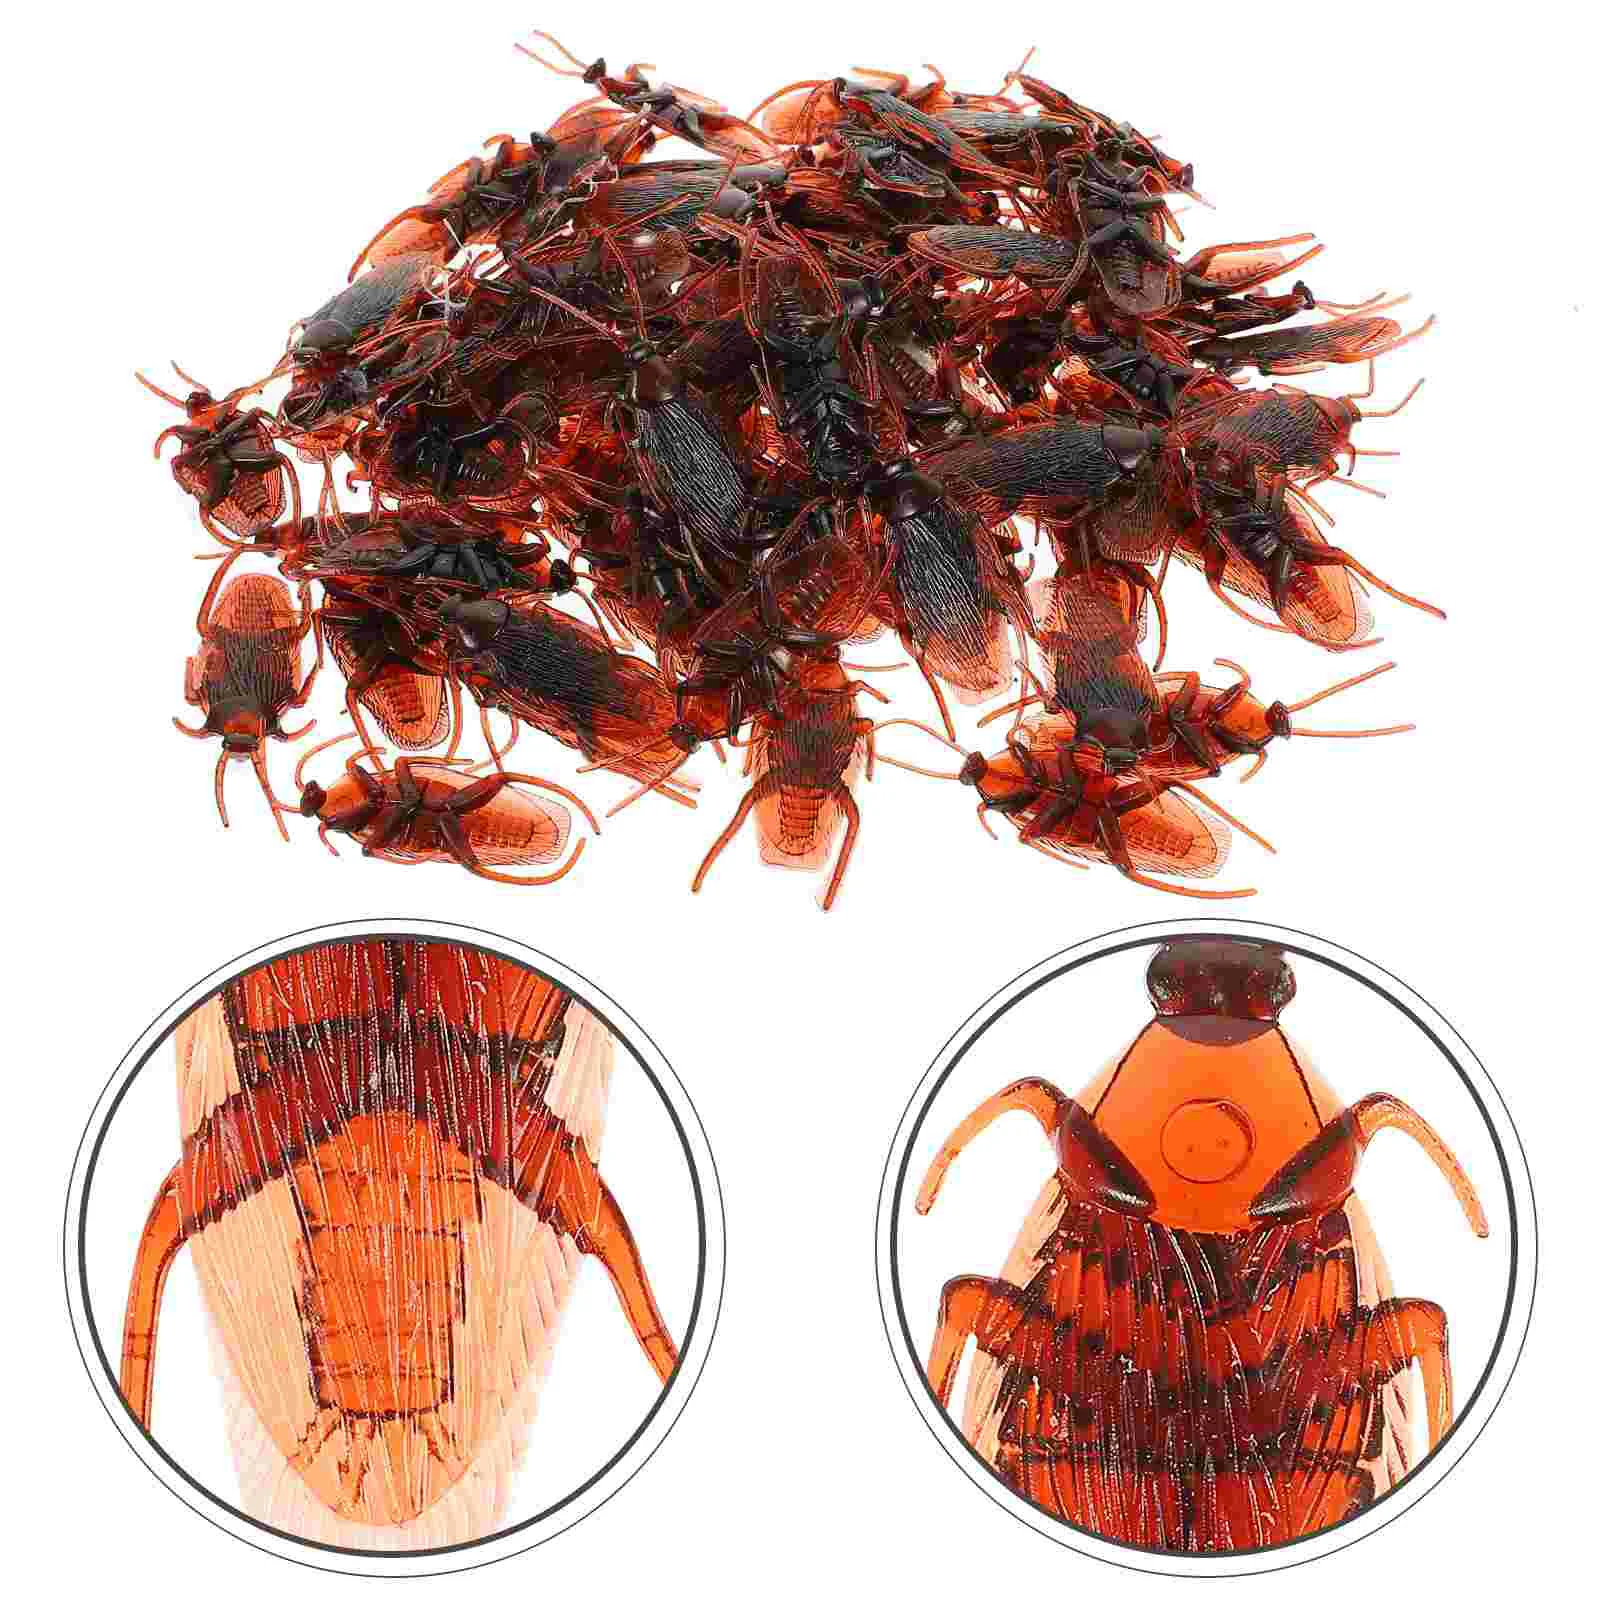 

TINKSKY 100pcs Fake Roach Prank Novelty Plastic Cockroach Bugs Look Real for Halloween Funny toys Bizarre